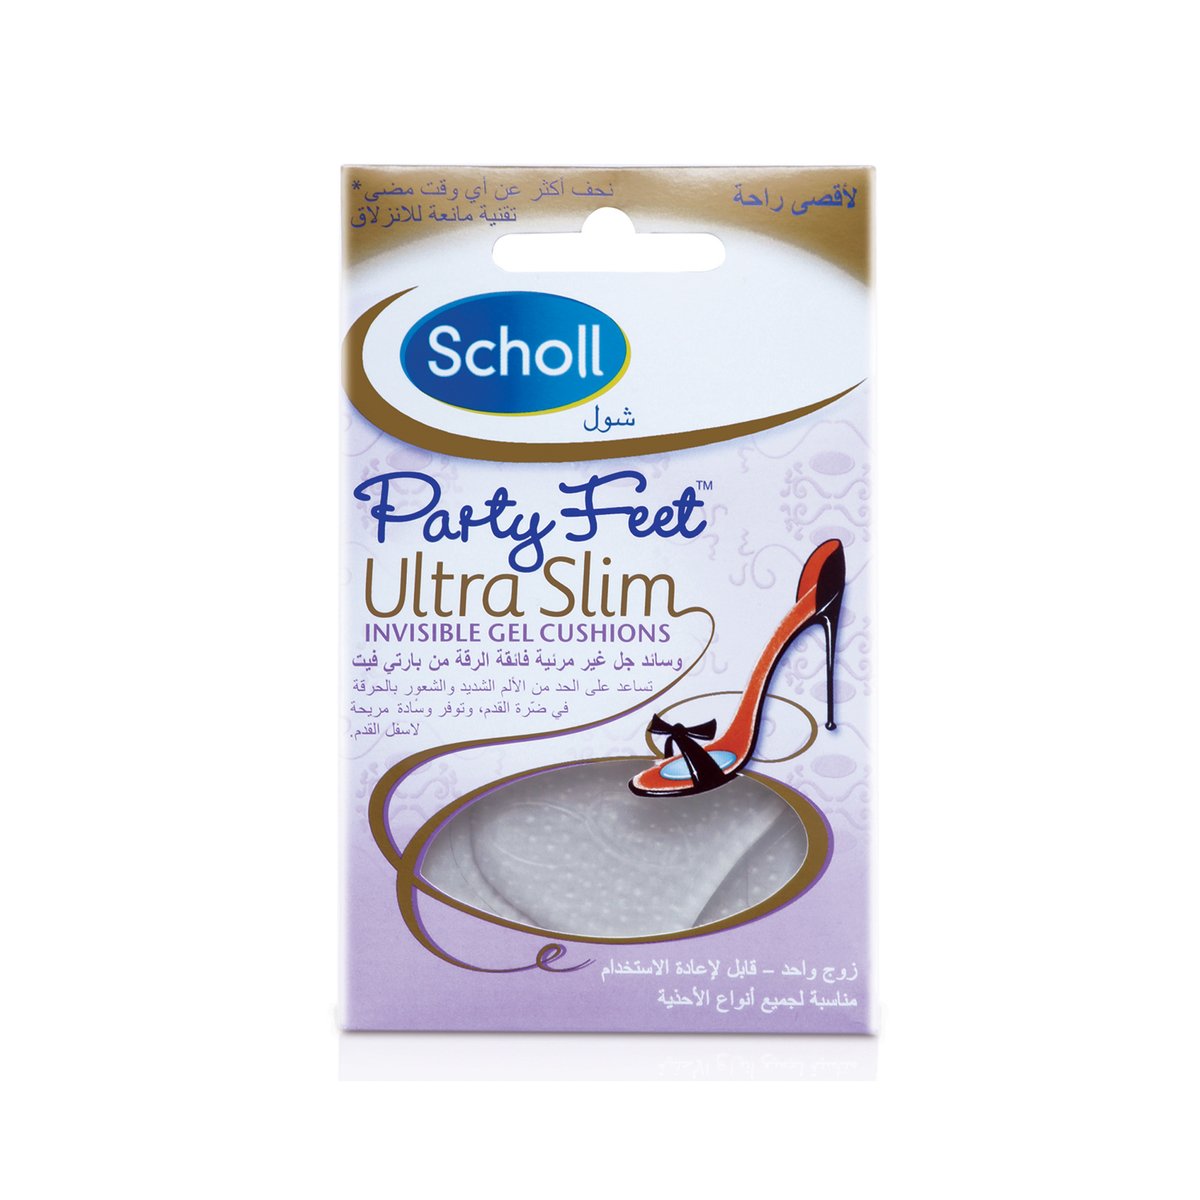 Scholl Foot Care Party Feet Ultra Slim Foot Cushions